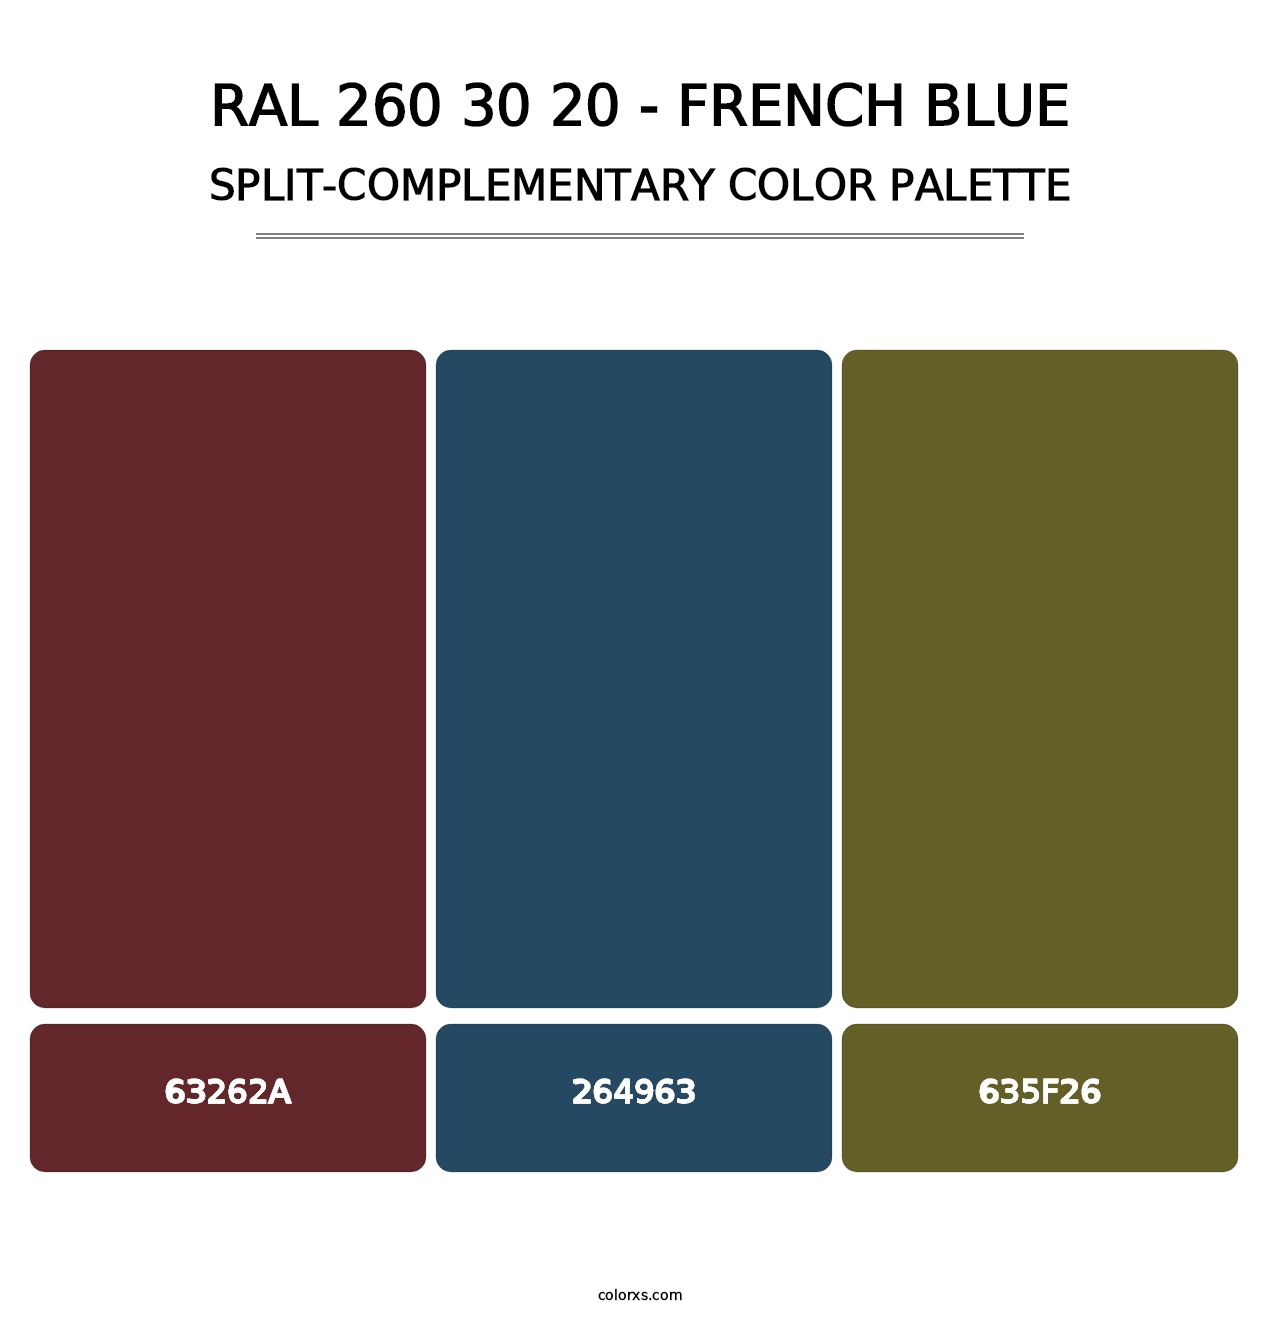 RAL 260 30 20 - French Blue - Split-Complementary Color Palette